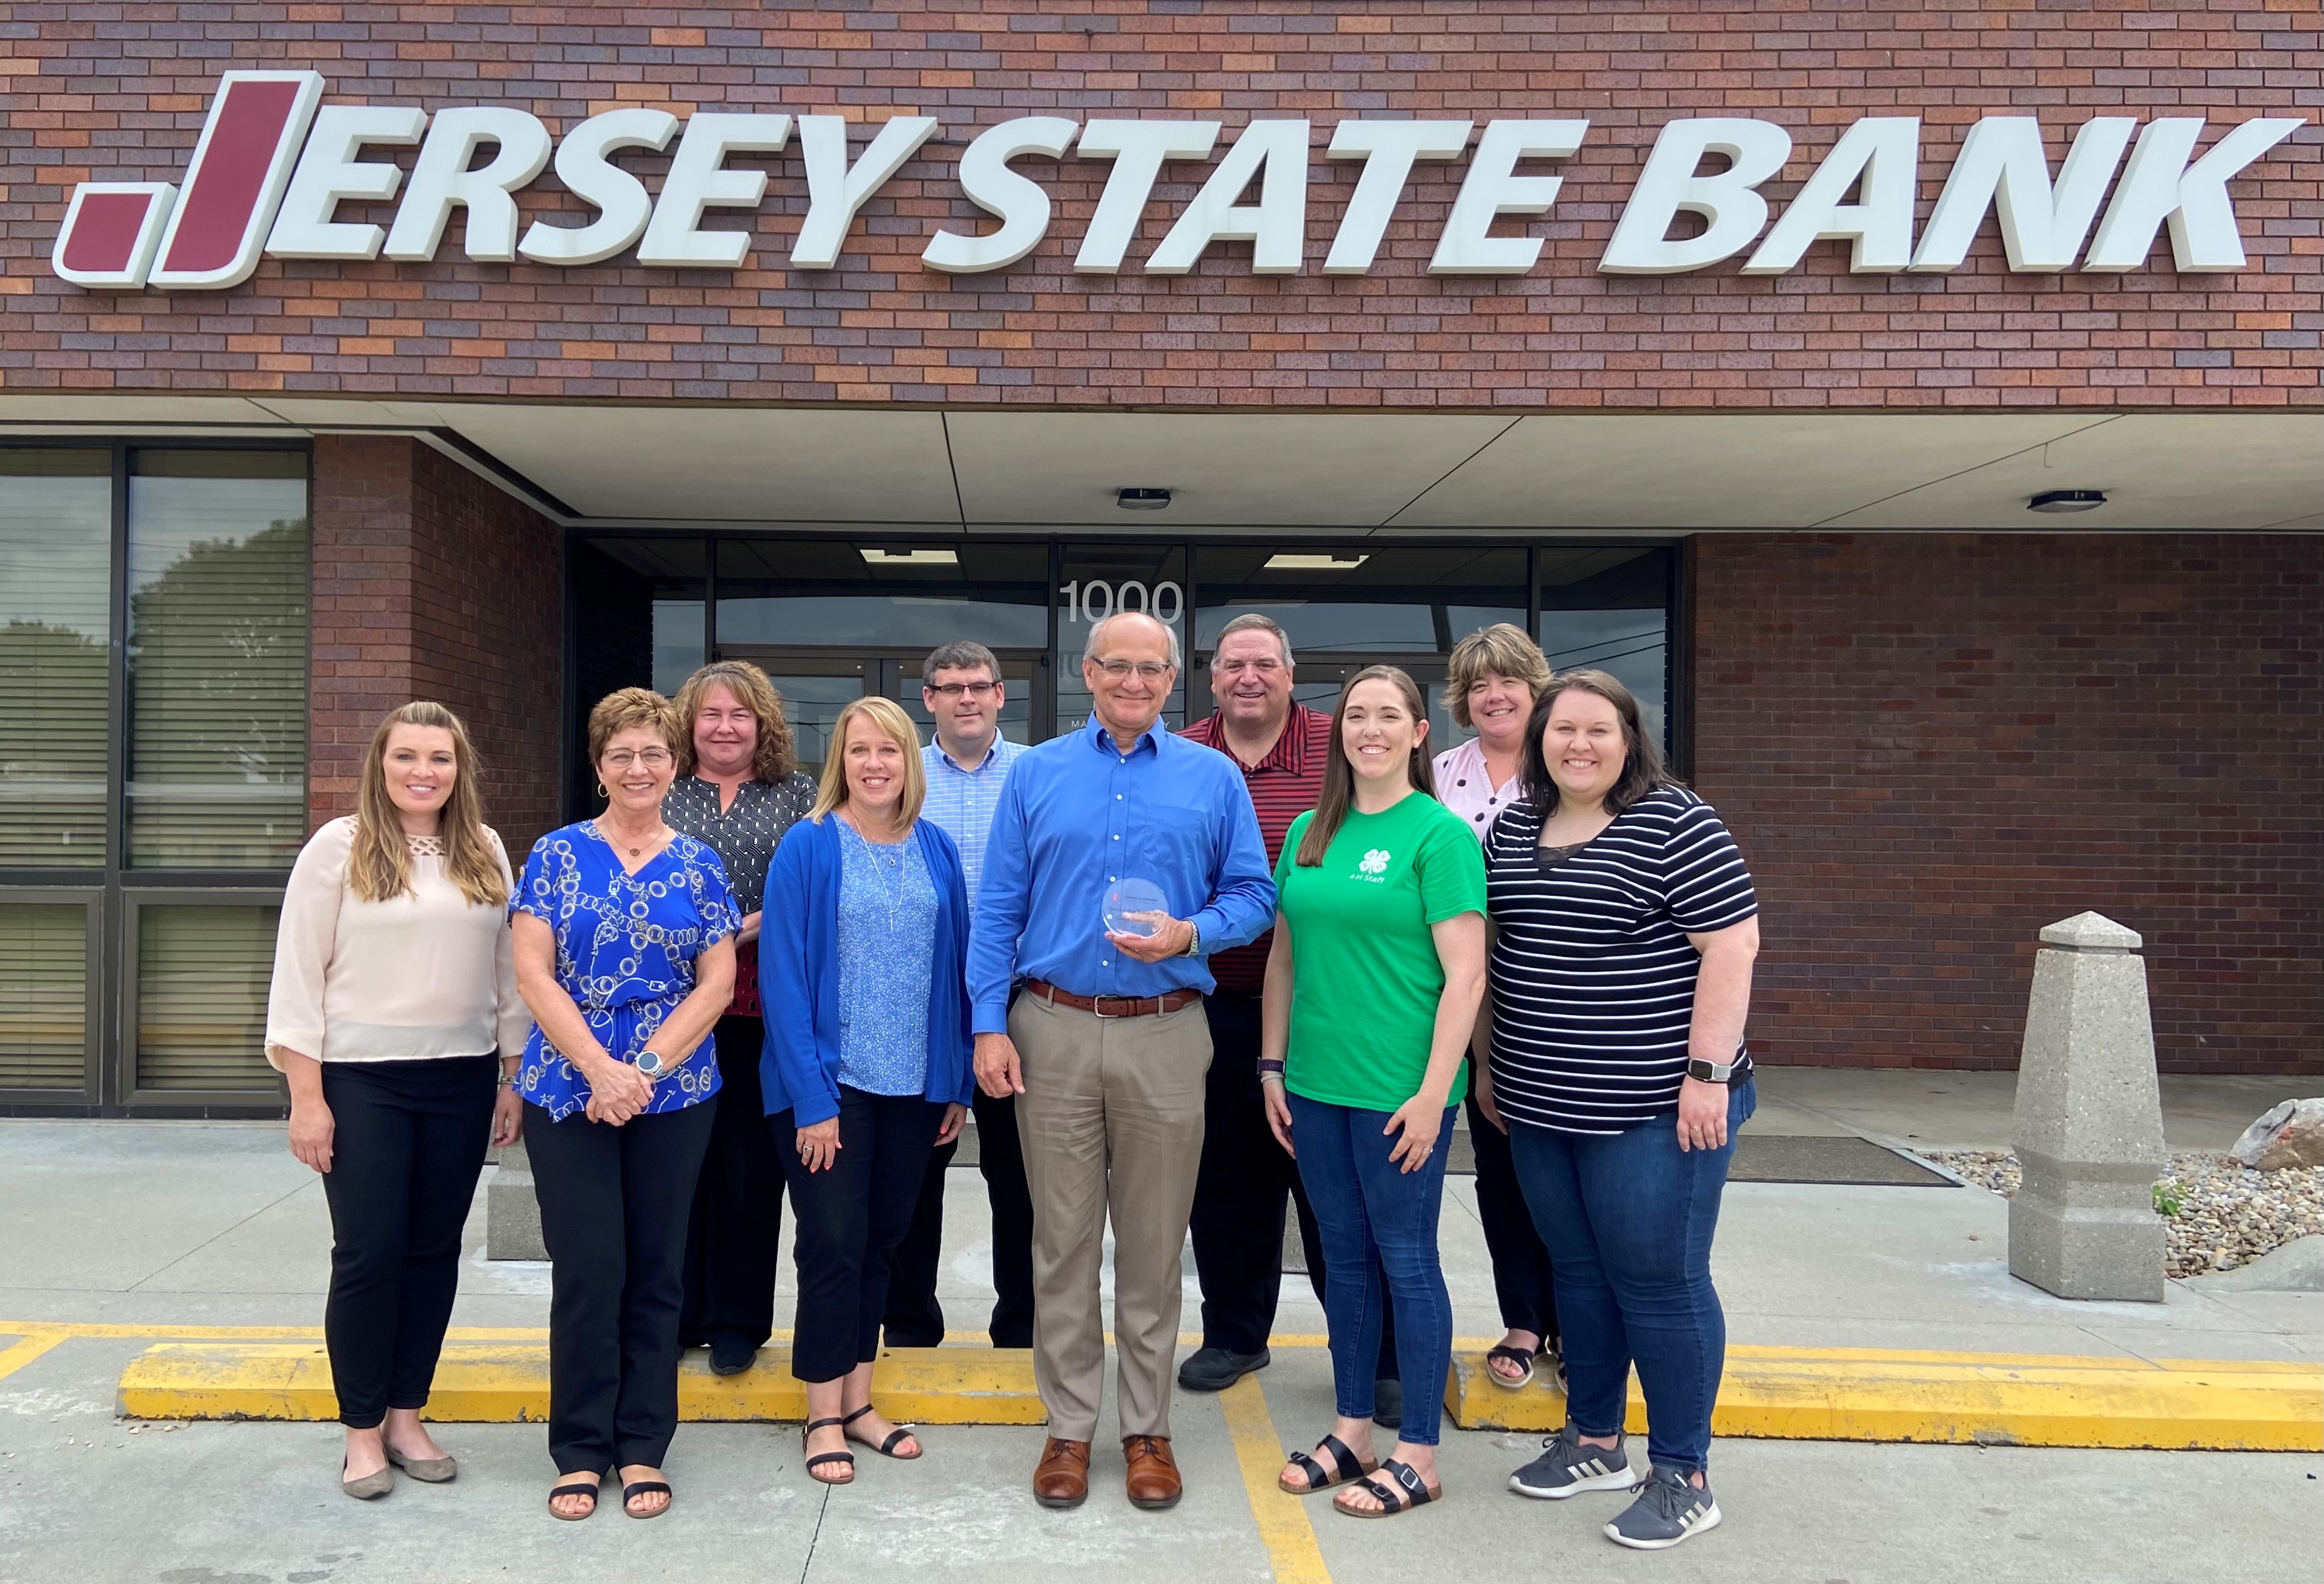 Extension  presenting Jersey State Bank with Community Partner Award